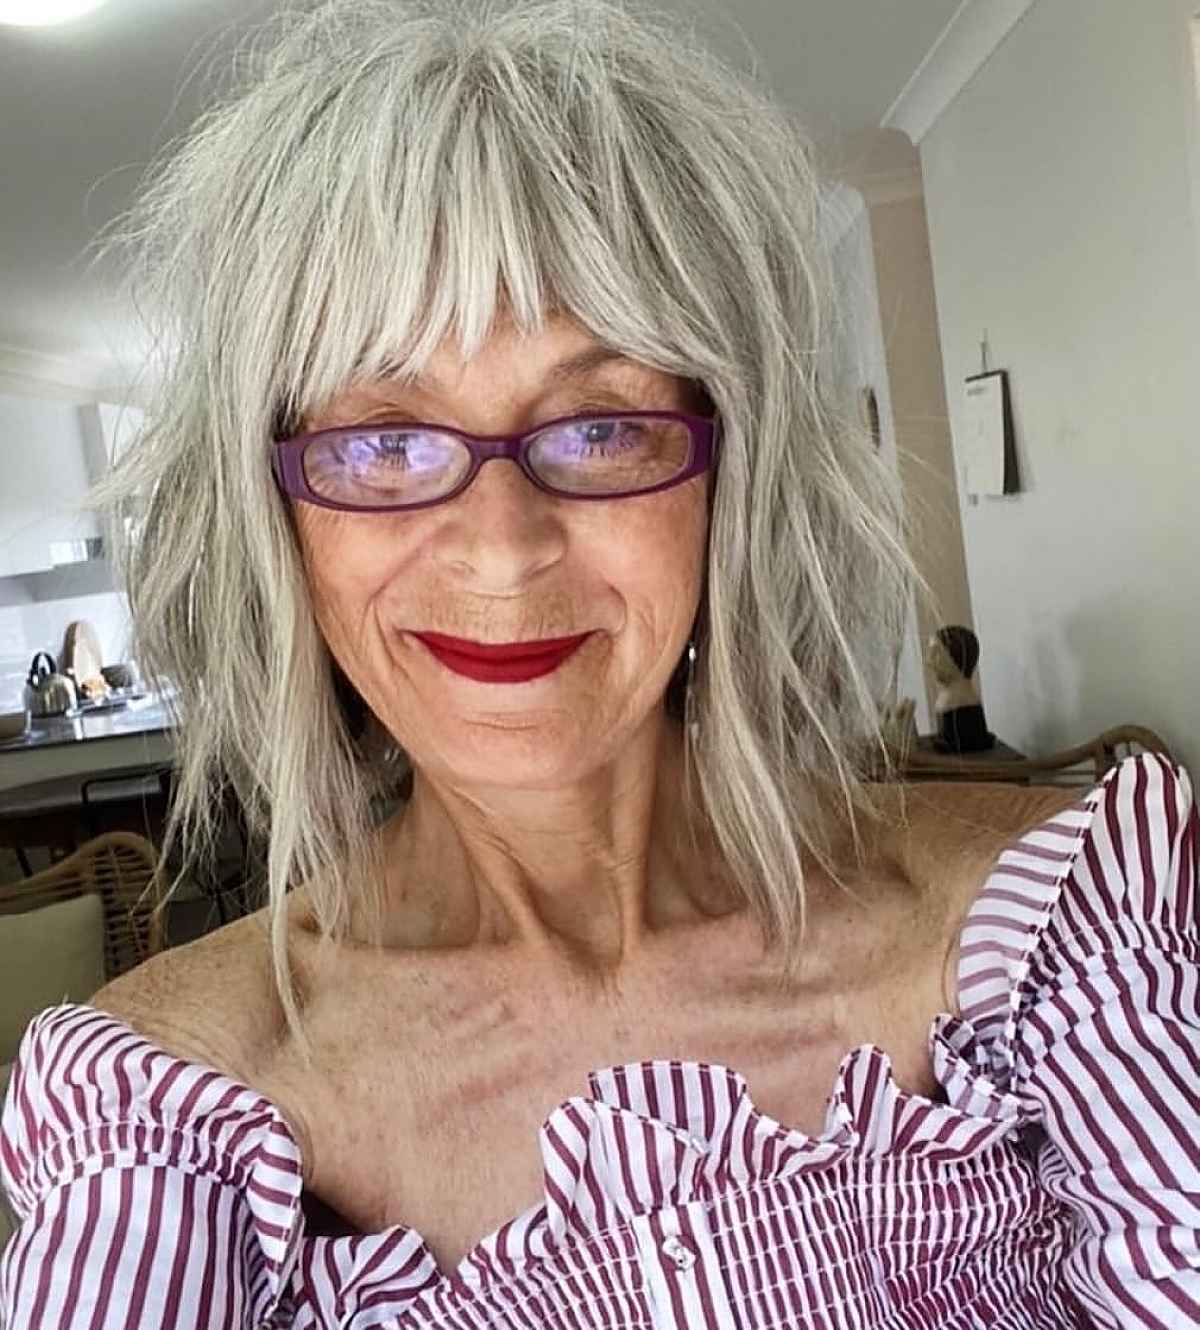 Bangs for women over 50 with square faces